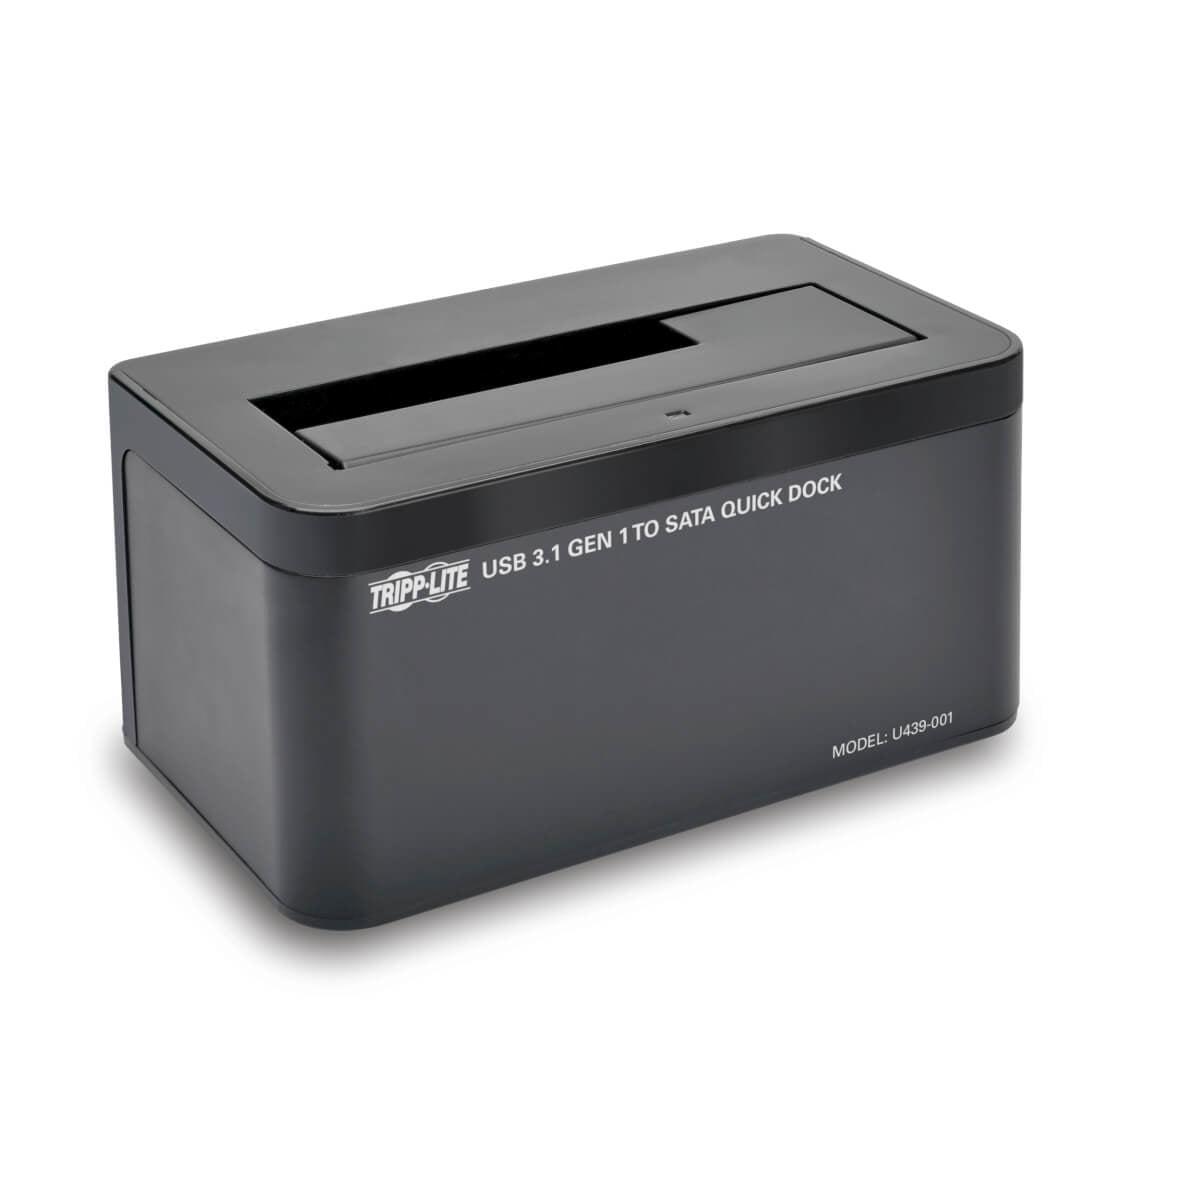 Tripp Lite Usb 3.1 Gen 1 Usb Type-C (Usb-C) To Sata Hard Drive Quick Dock For 2.5 In. And 3.5 In. Hdd And Ssd